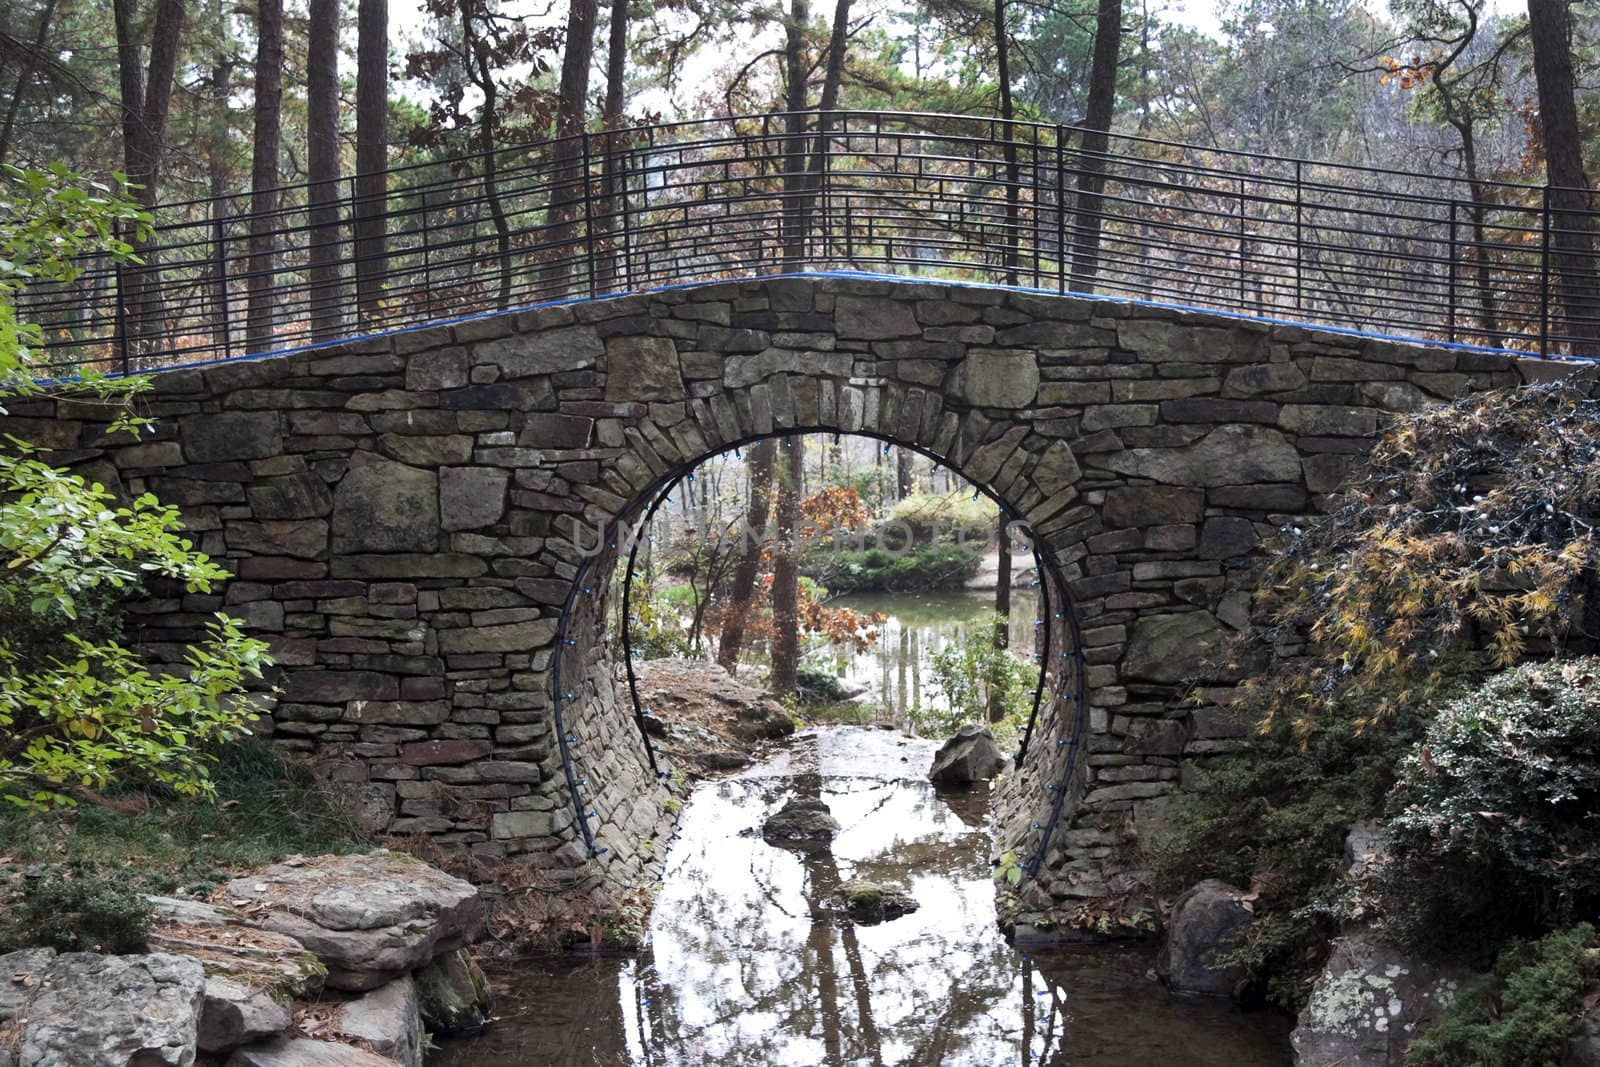 A bridge spanning over a small pond made of stone